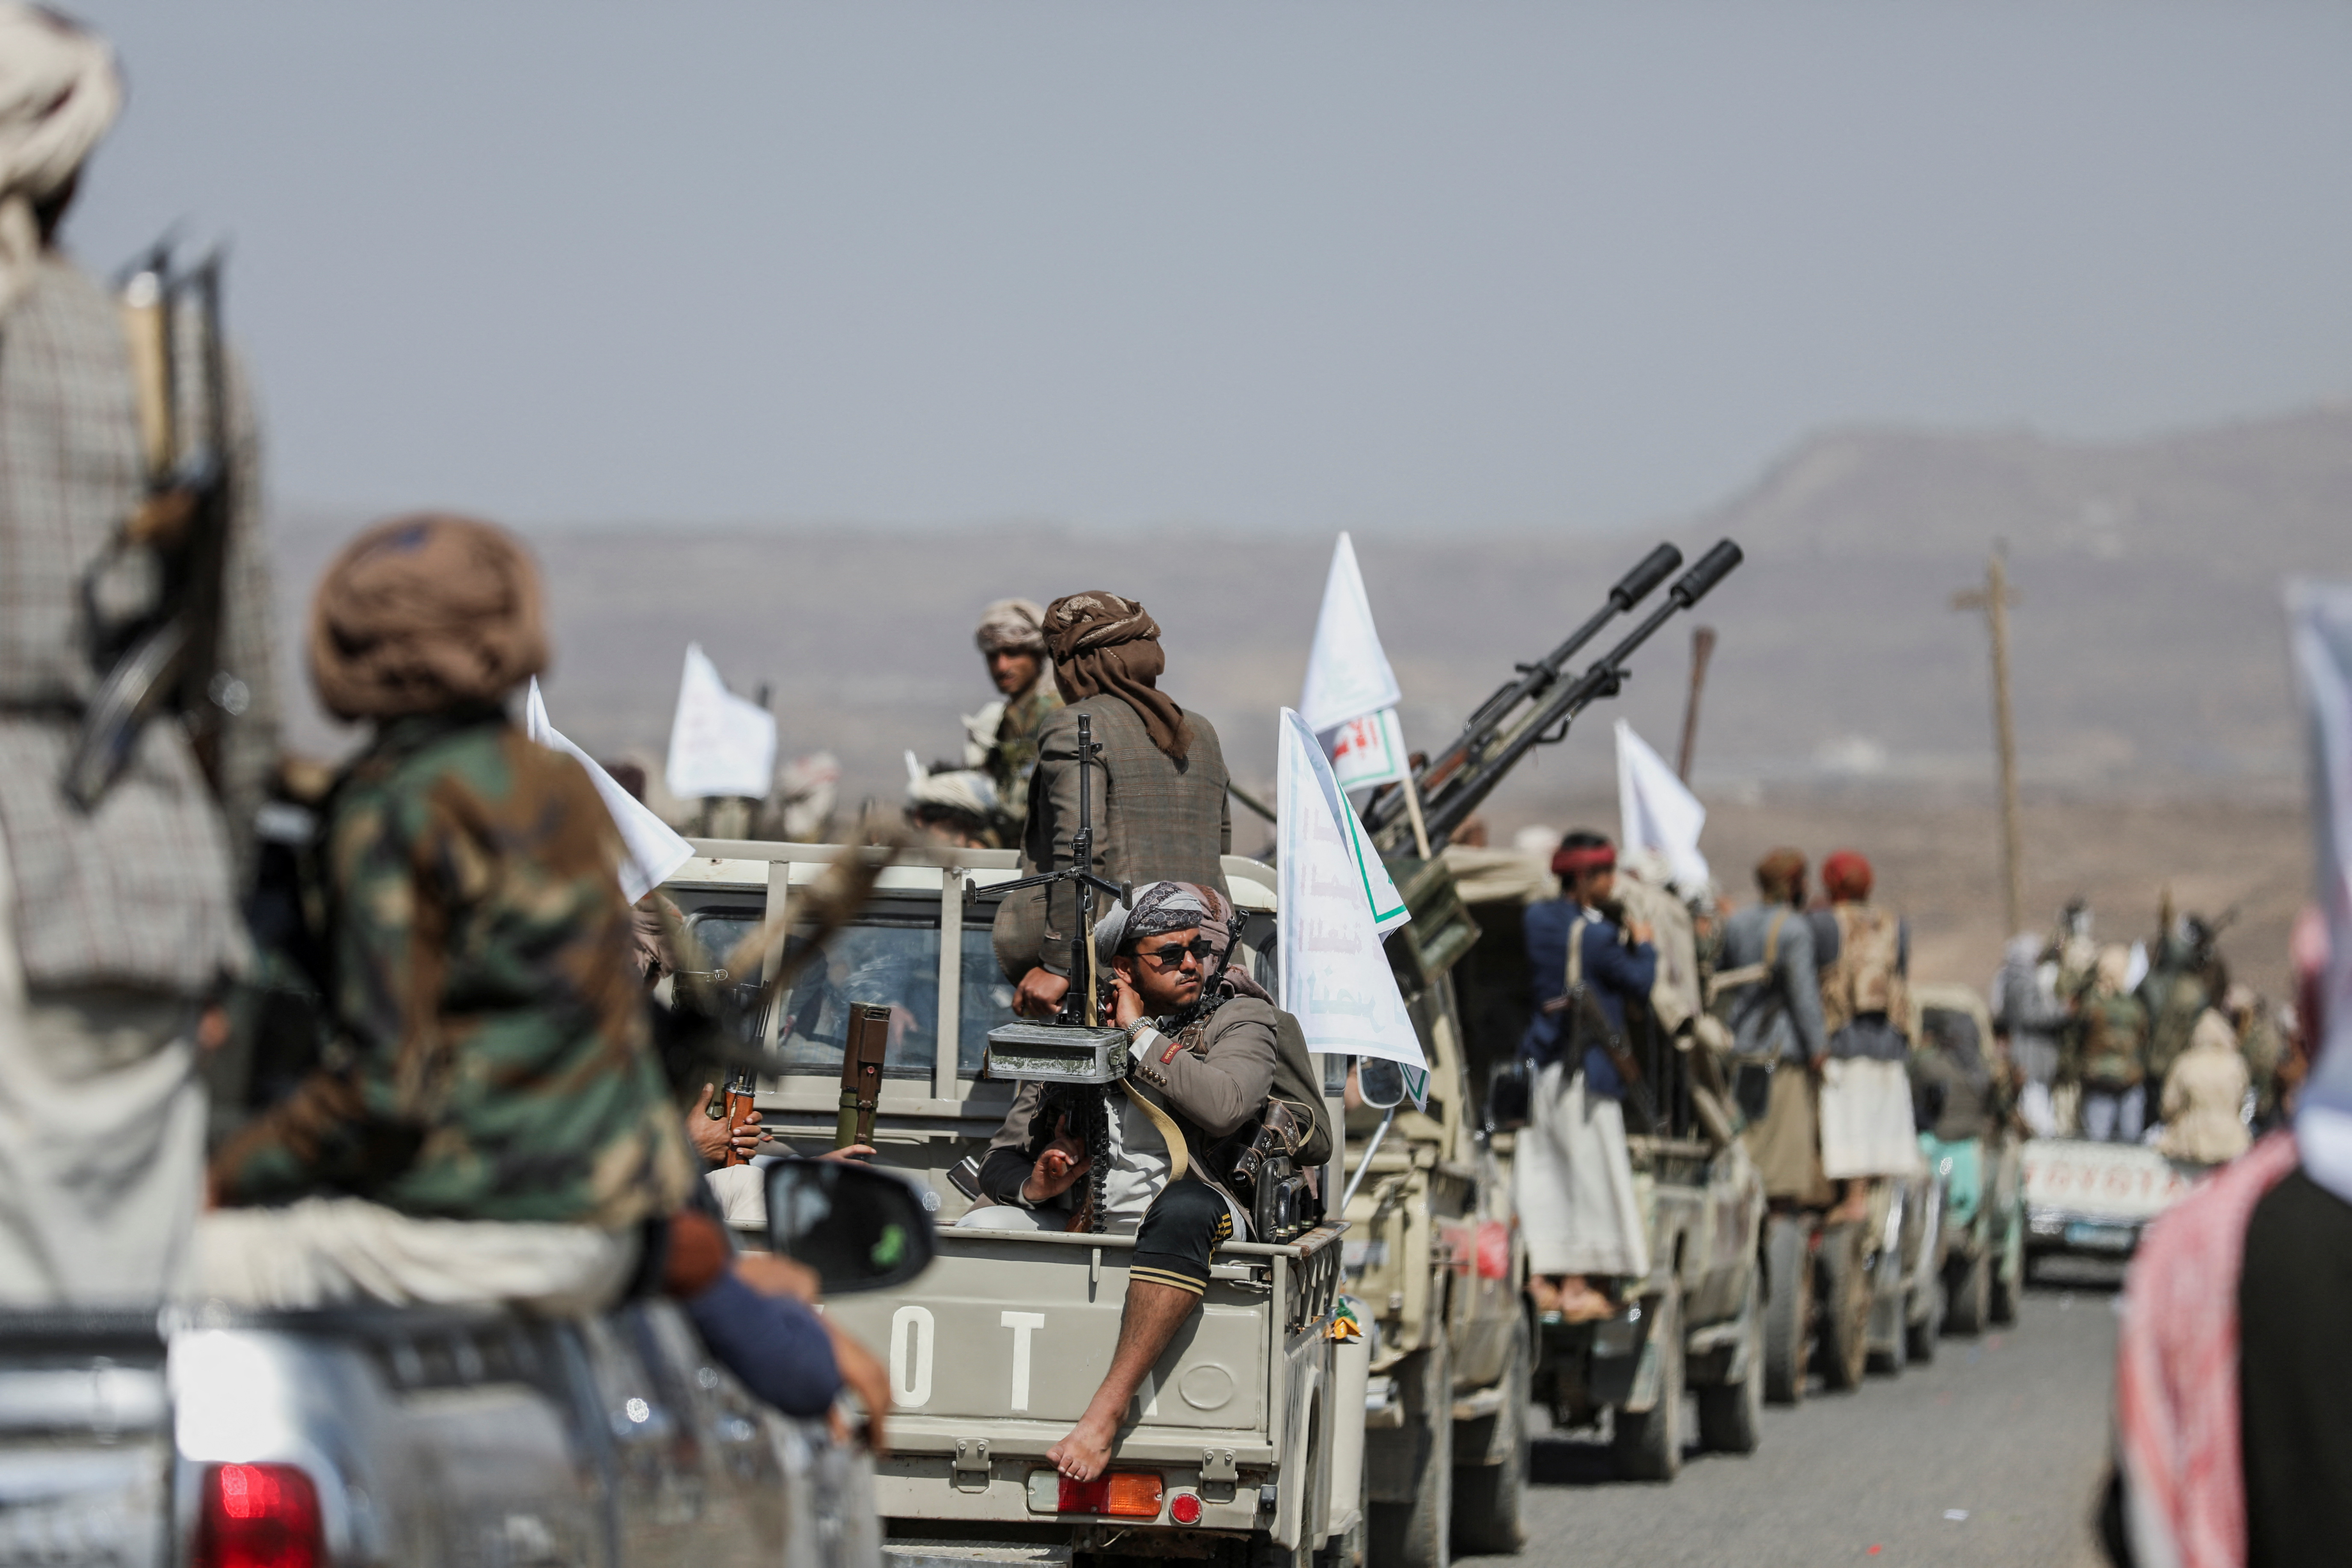 Houthi tribesmen gather to show defiance after U.S. and U.K air strikes on Houthi positions near Sanaa